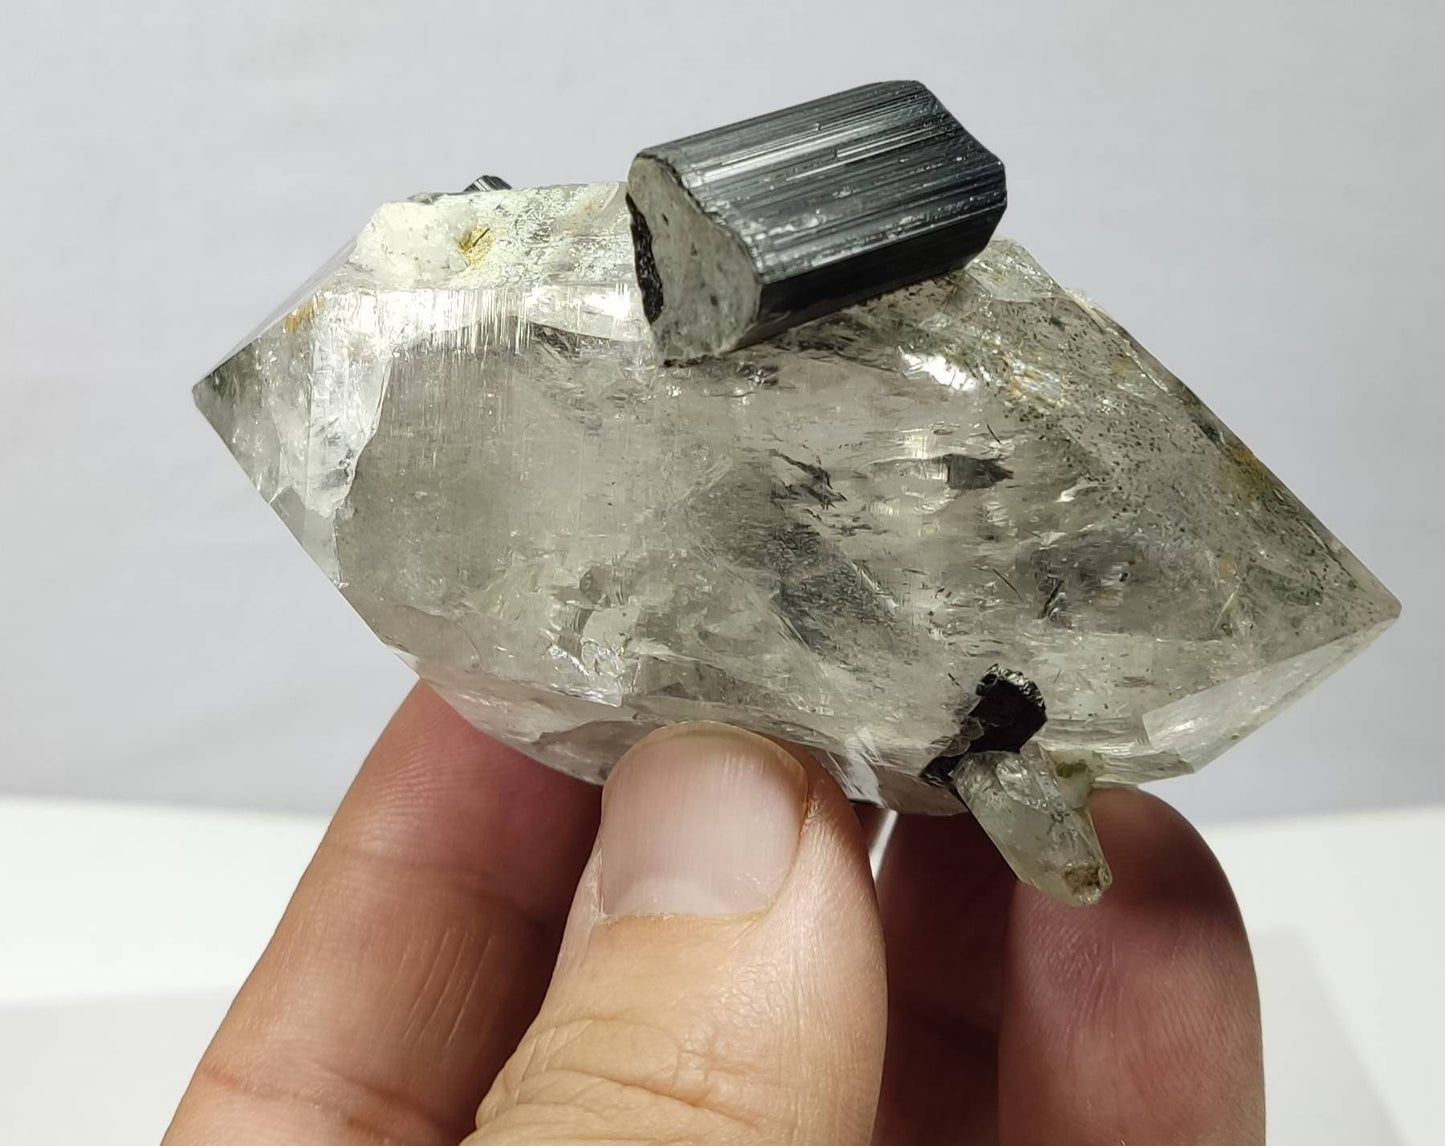 Double terminated quartz crystal with Tourmaline crystal  187 grams